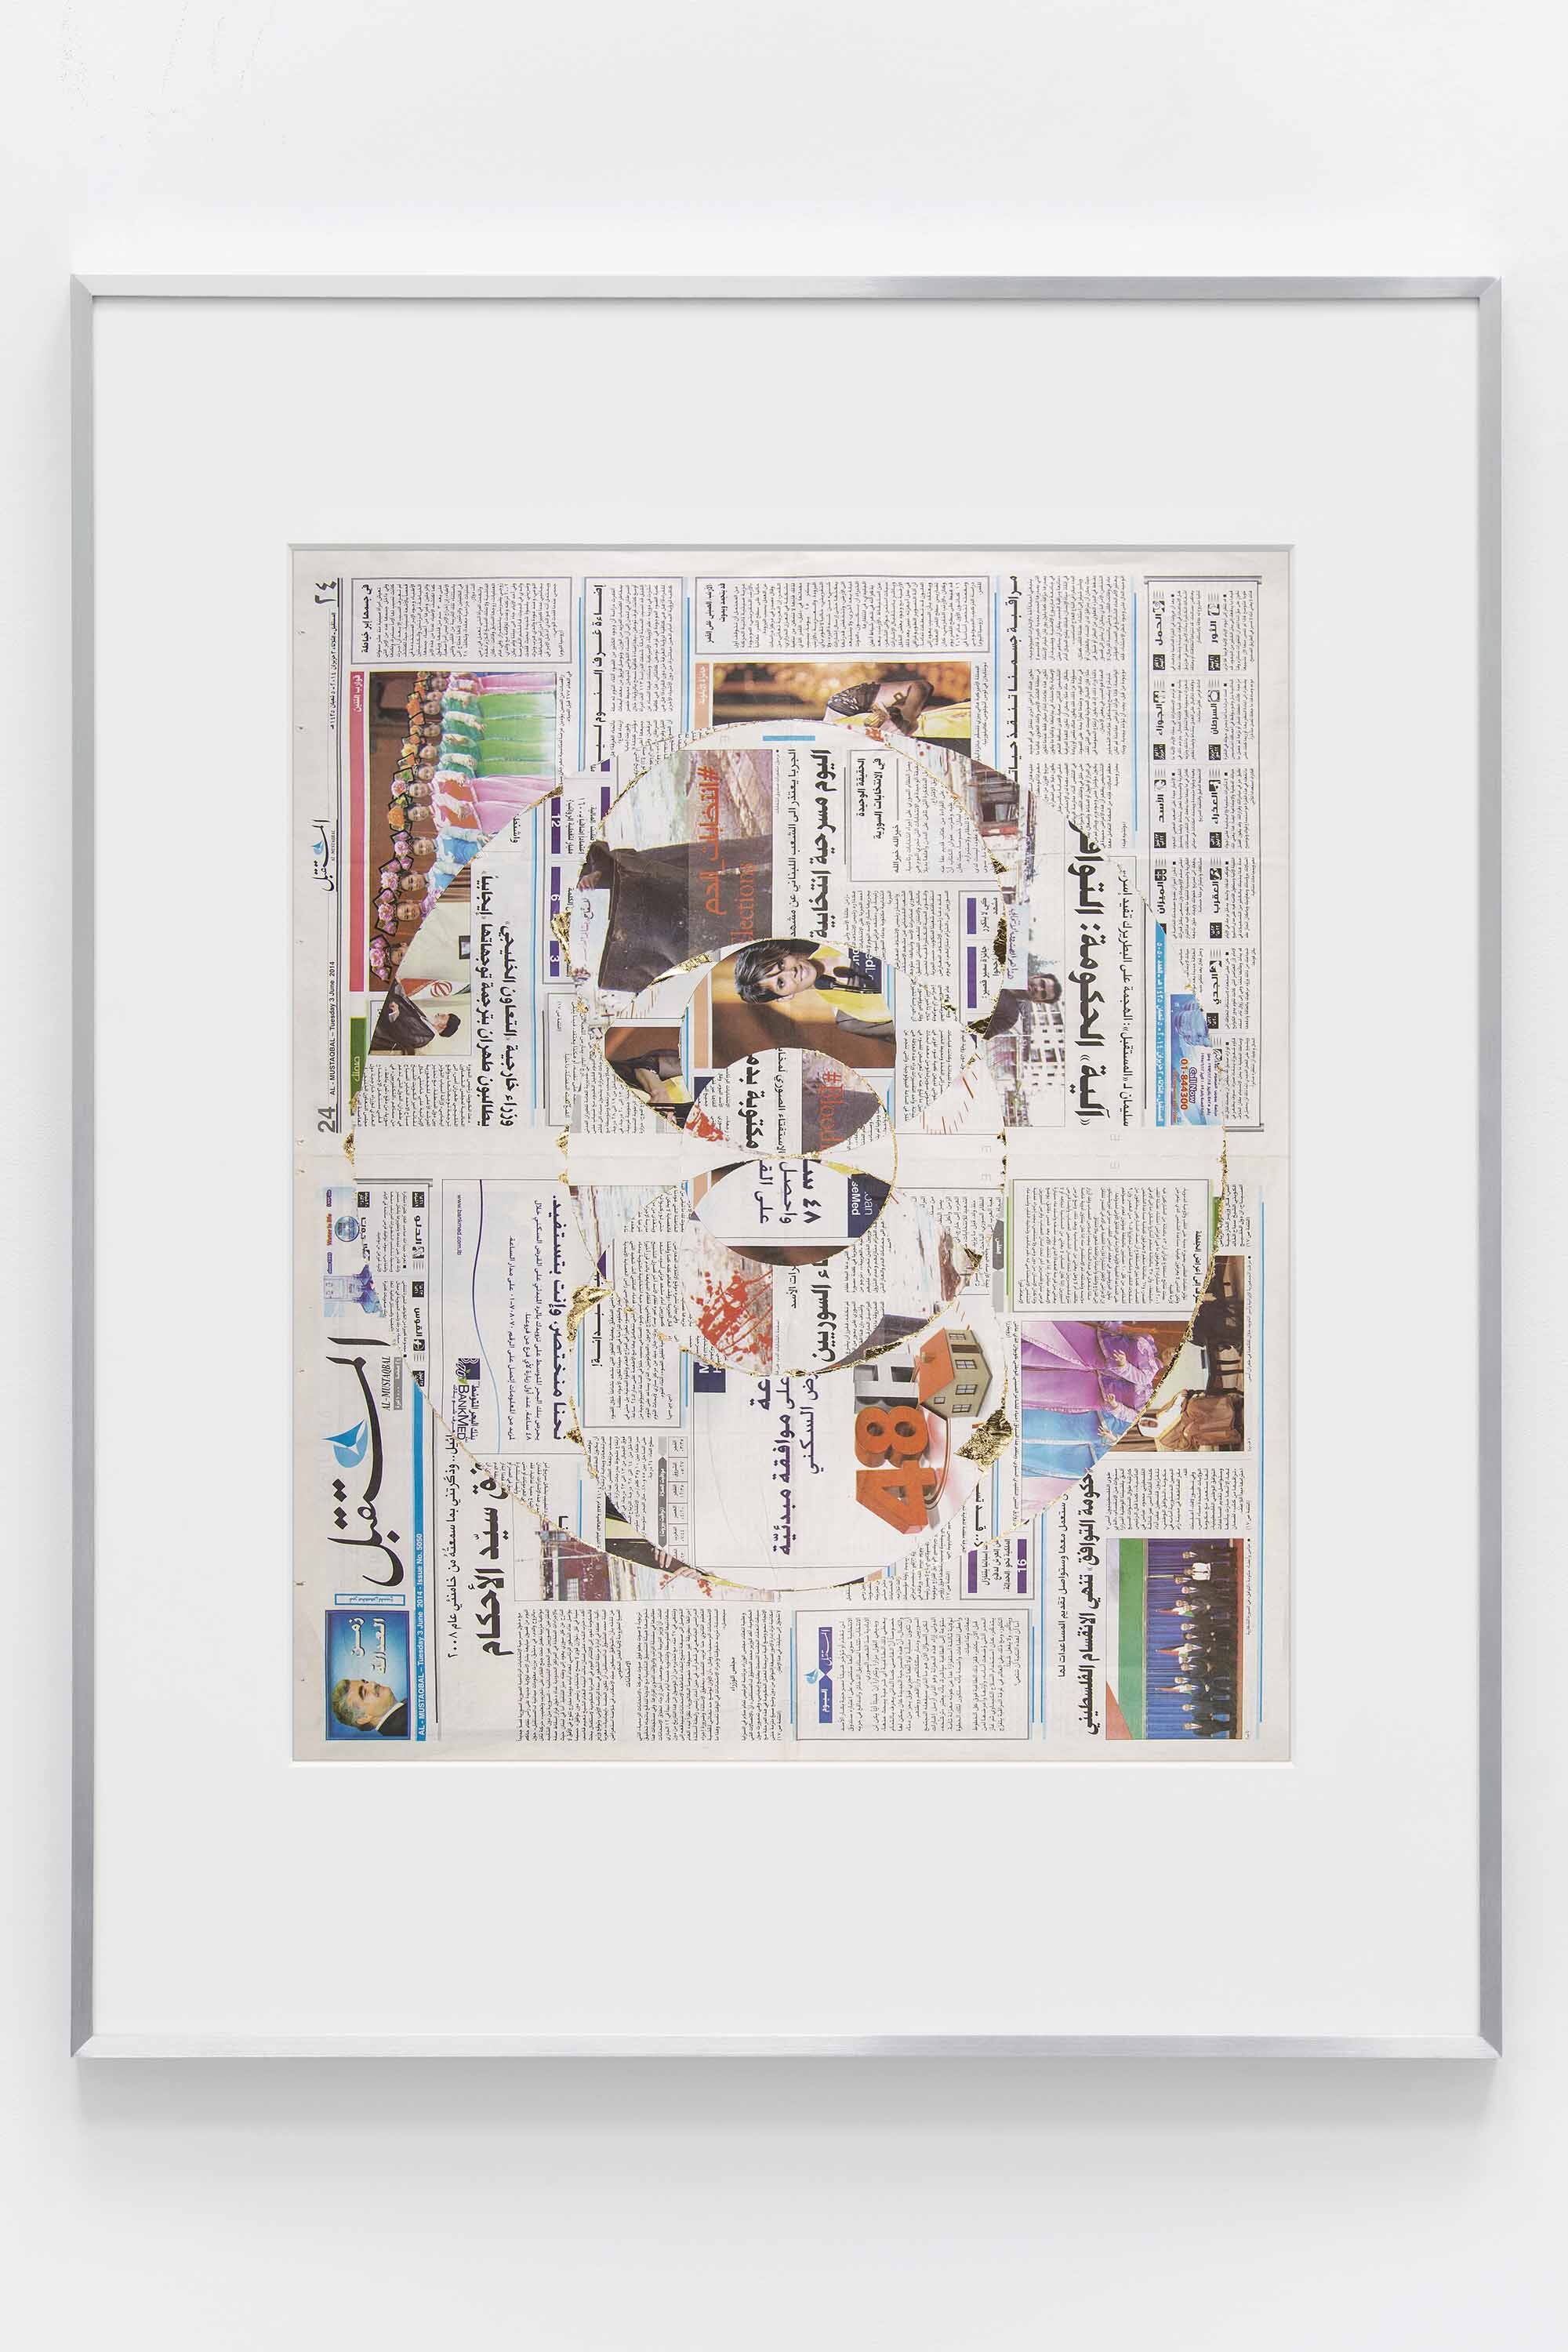   Blind Collage (Seven 180º Rotations, Al-Mustaqbal: Beirut, Lebanon, Tuesday, June 3, 2014)    2021   Newspaper, tape, and 22 karat gold leaf  39 1/8 x 31 1/4 inches  Exhibition:   Foreign Correspondence, 2021  